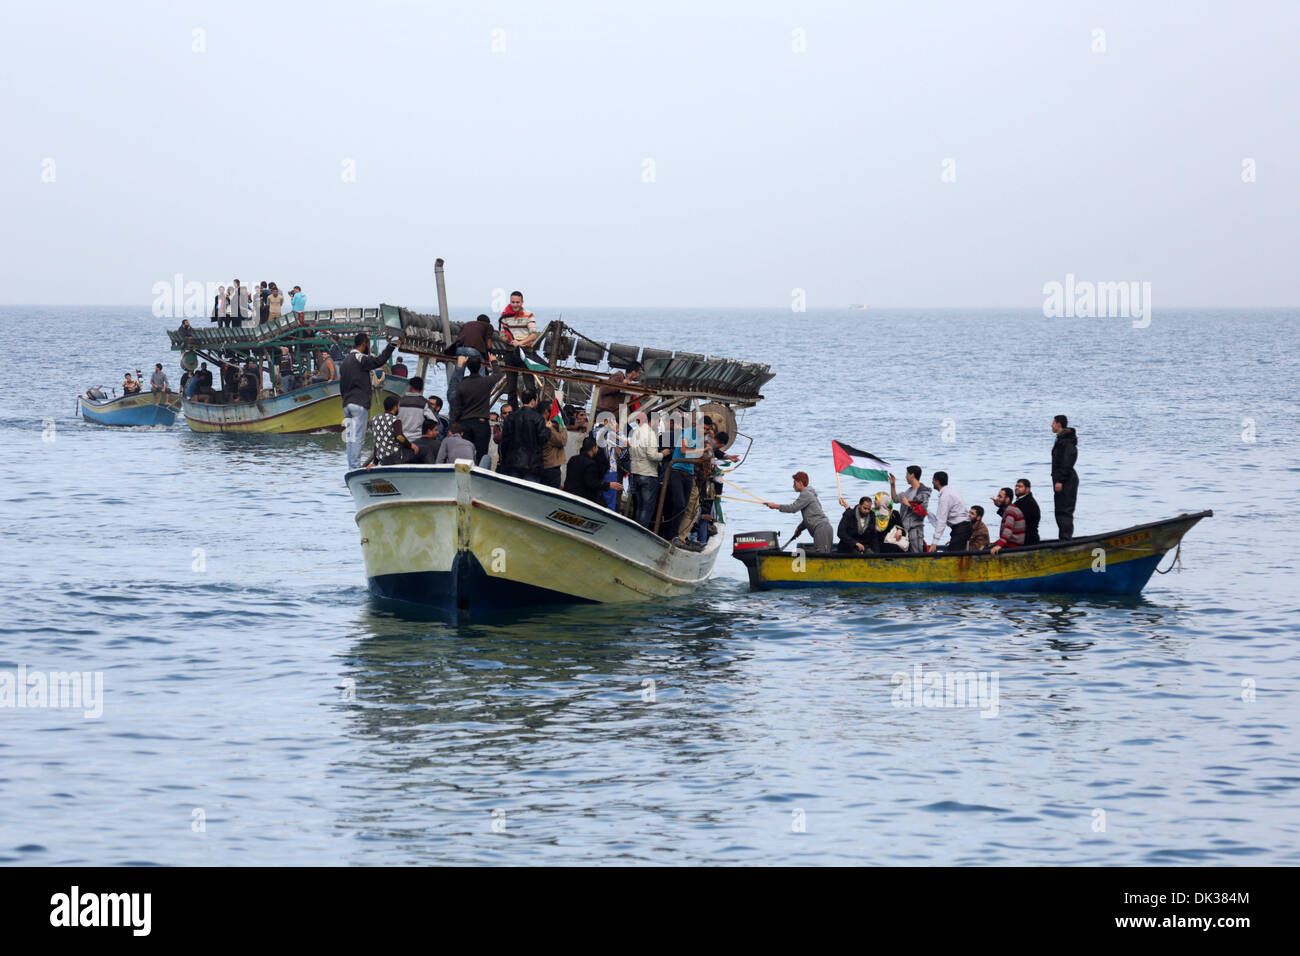 Gaza. 2nd Dec, 2013. Palestinians sail their boats as part of a convoy which launched at the initiative of the 'Intifada Youth Coalition' to break the naval blockade of Gaza as a protest against the Israeli siege in Gaza port on Dec. 2, 2013. Credit: Xinhua/Wissam Nassar/Alamy Live News Stock Photo